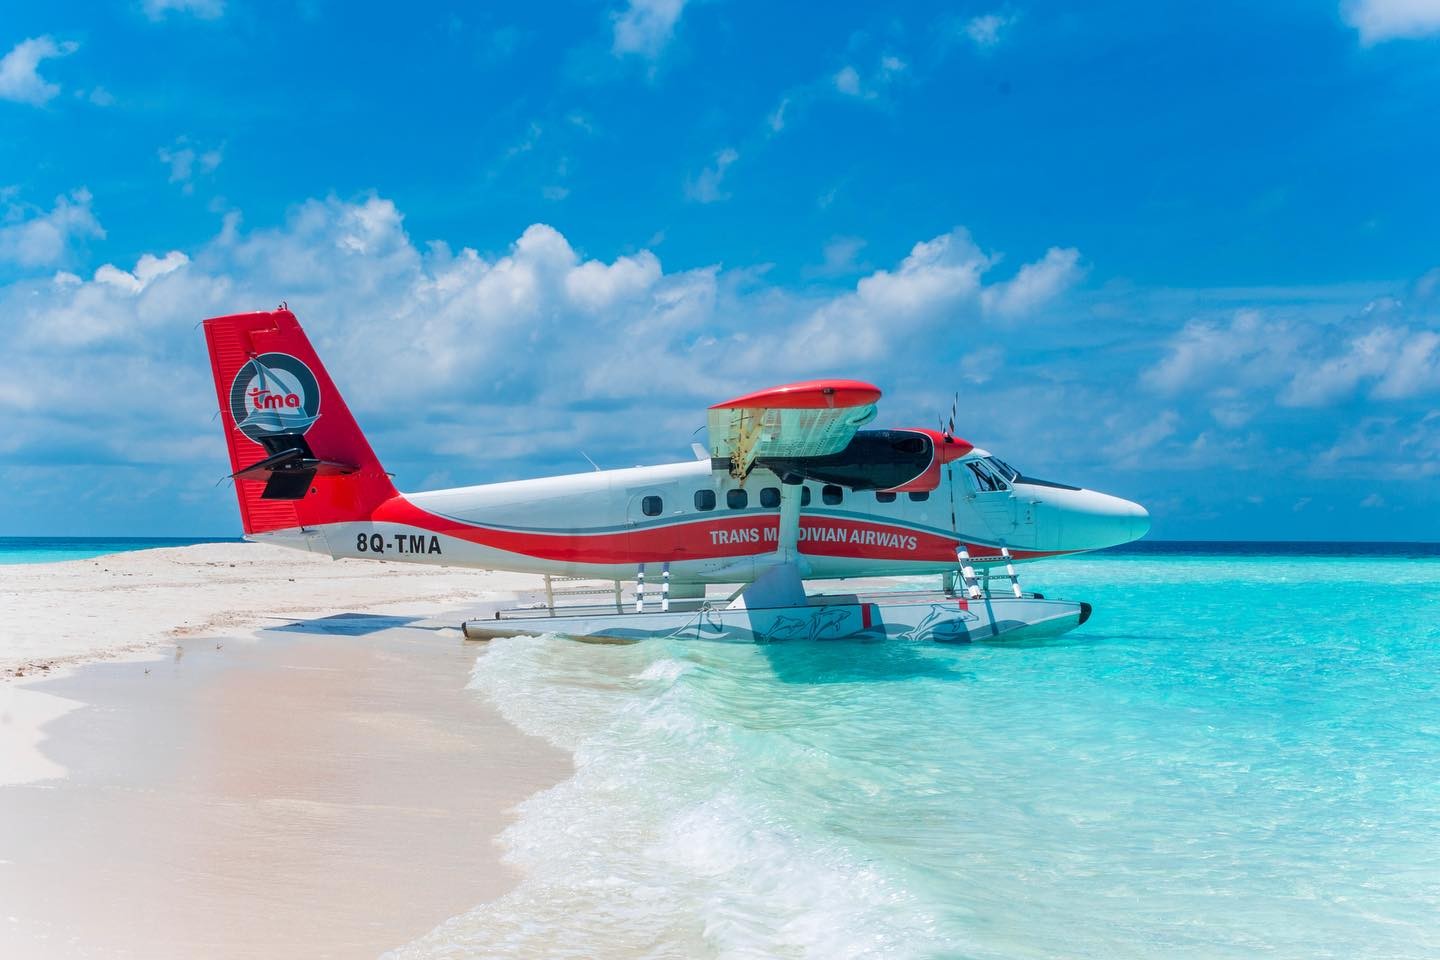 How Much Does A Trip To The Maldives Cost?